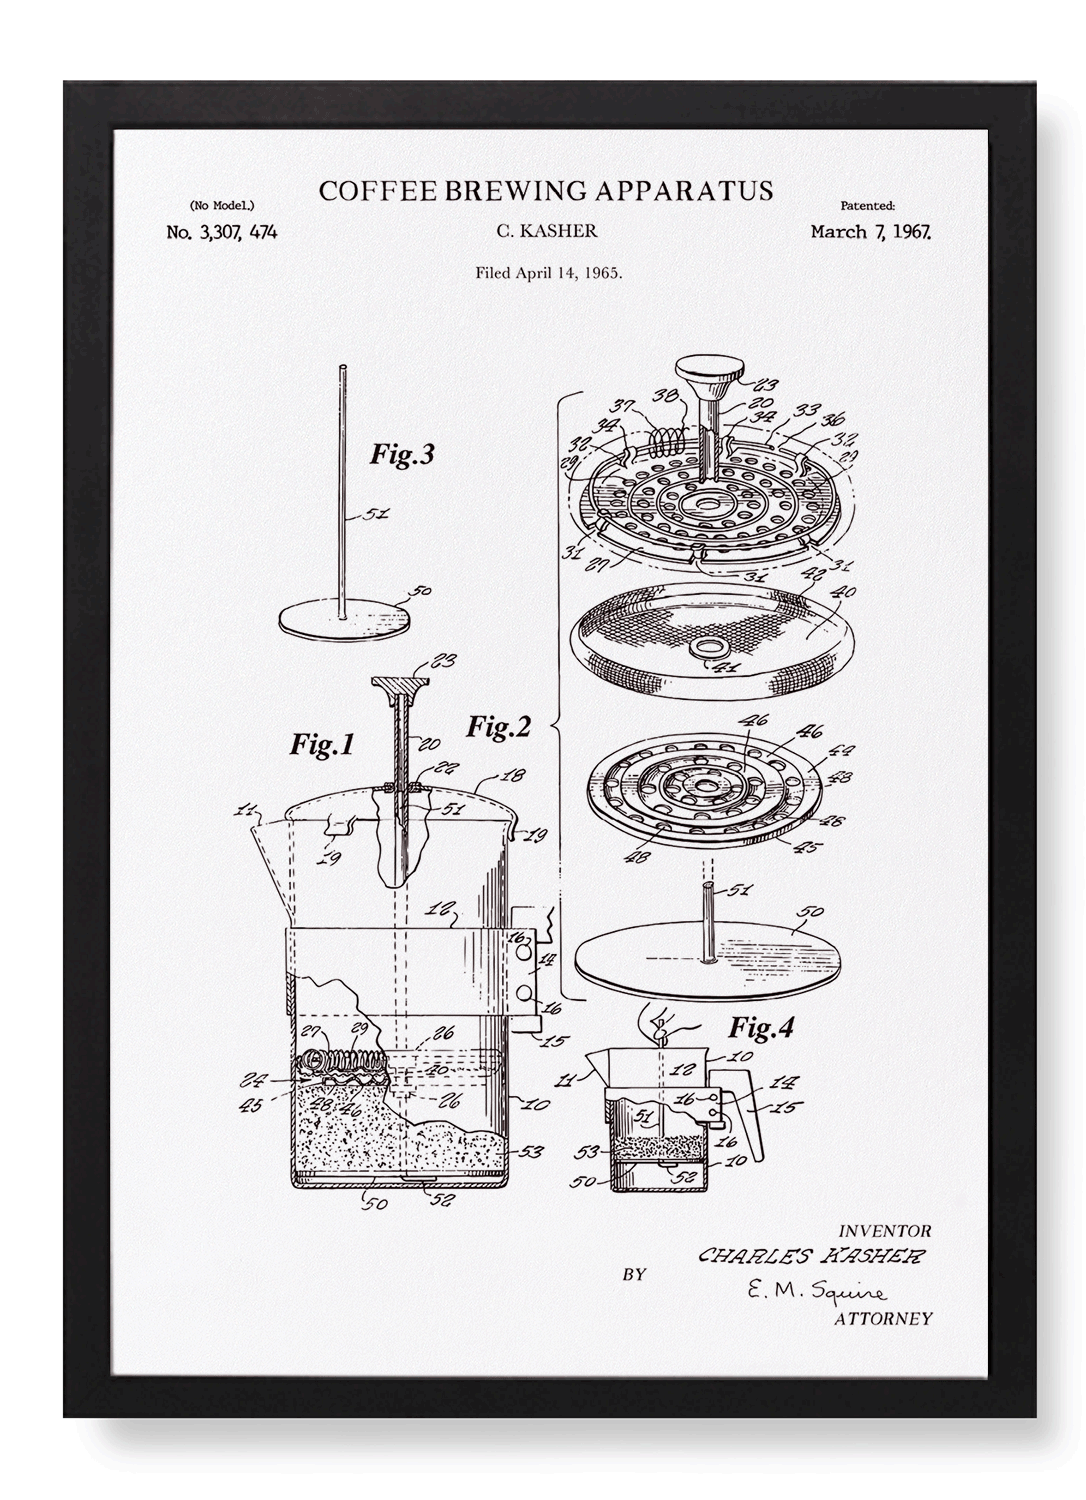 PATENT OF COFFEE BREWING APPARATUS (1967)